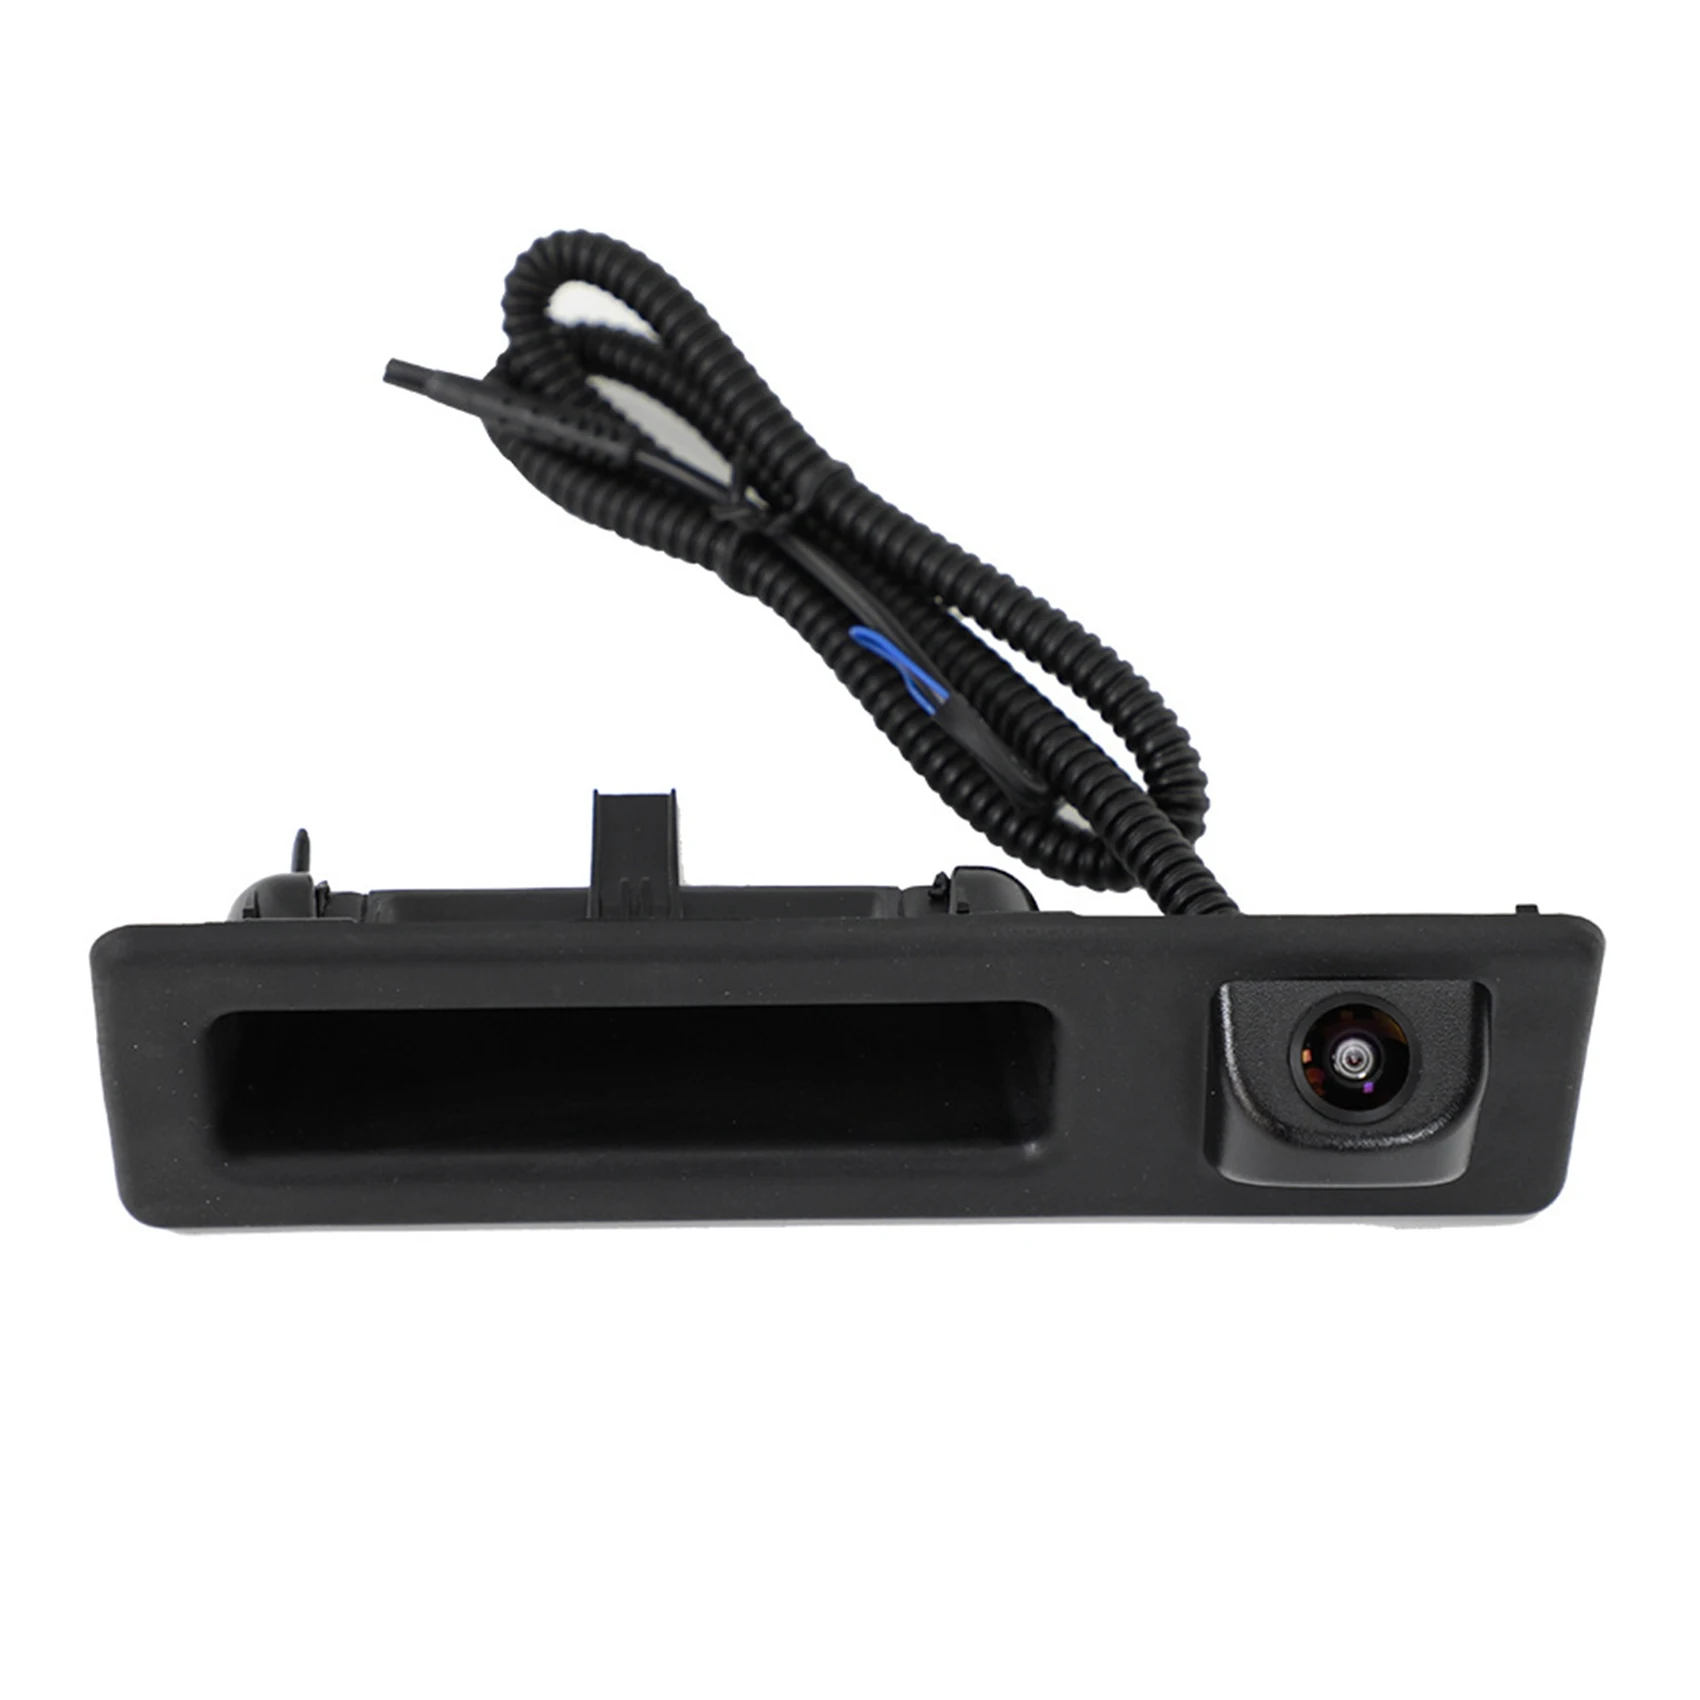 

Car Rearview Image Reverse Handle Tailgate Backup Camera Parking Camera for-BMW 5 Series 3 Series X3/X4/X5